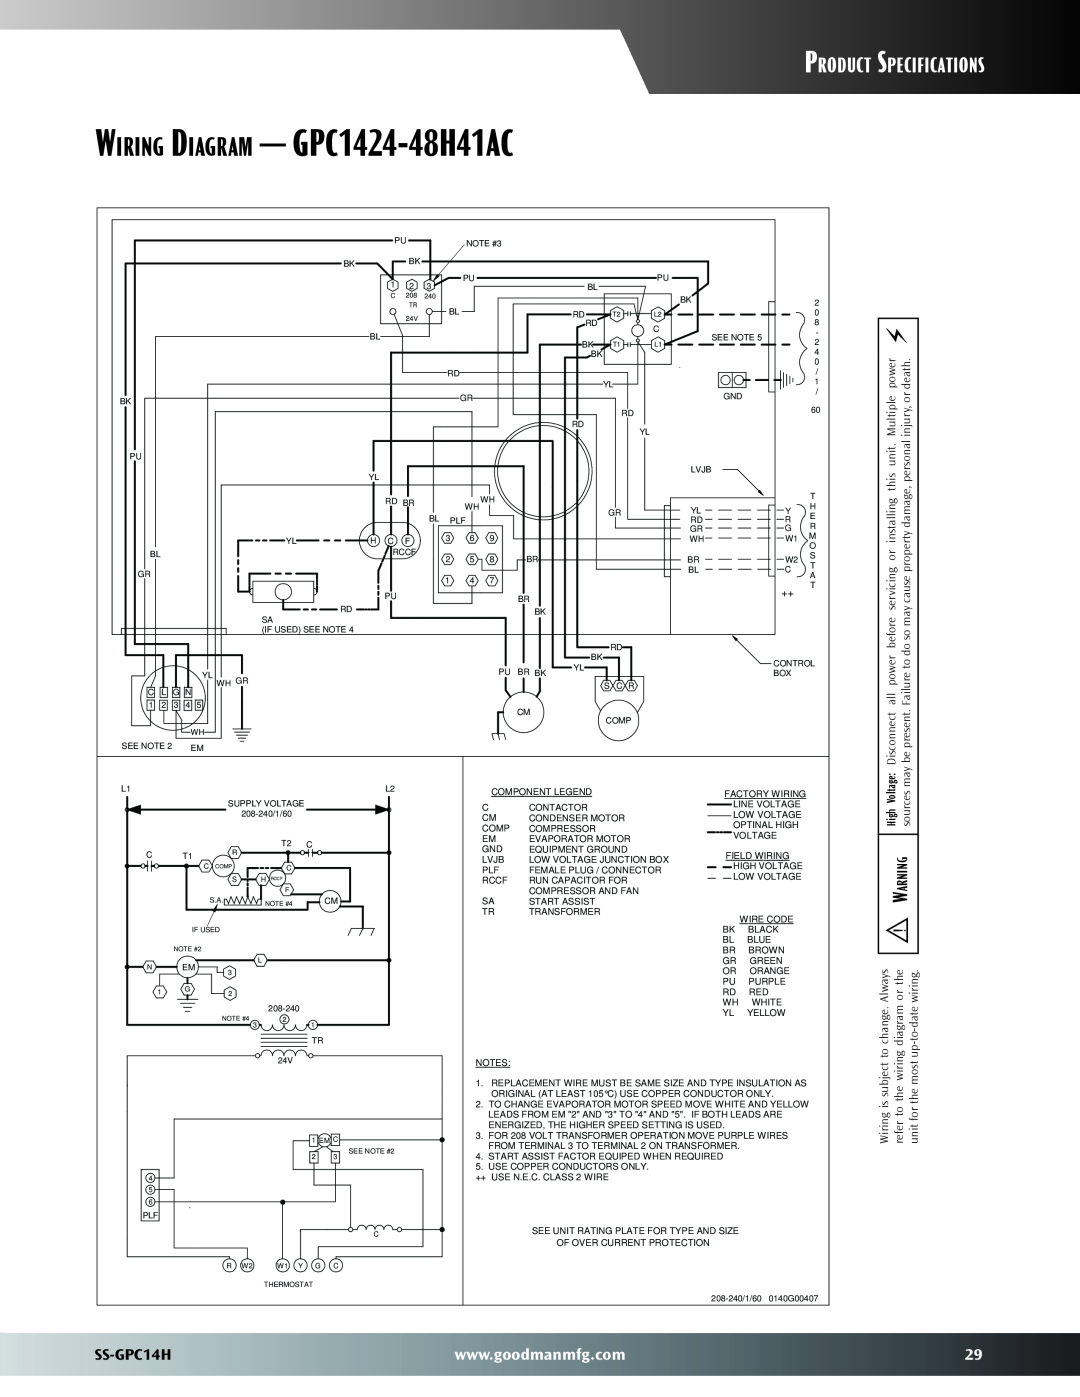 Goodman Mfg warranty Wiring Diagram - GPC1424-48H41AC, Product Specifications, SS-GPC14H, Disconnect, be present 